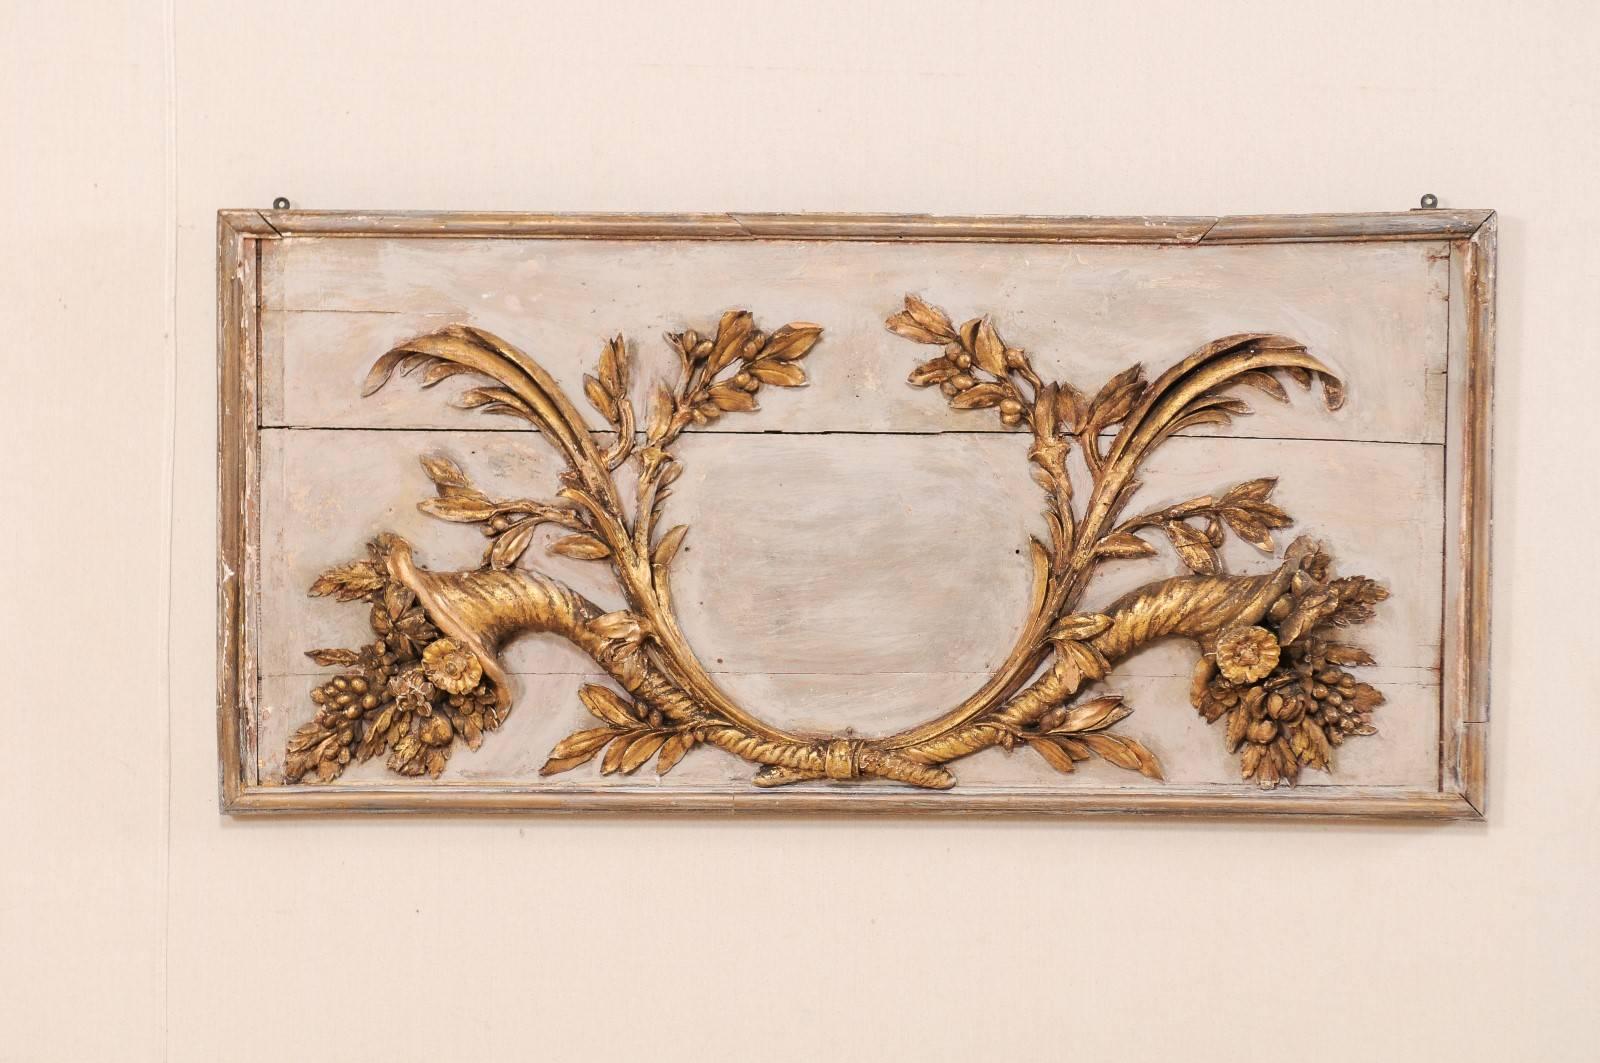 An 18th century Italian wood carved decorative hanging wall plaque. This rectangular shaped Italian wall decoration features a three dimensional pair of exquisitely carved cornicello affixed to a wooden plaque. The cornicello baskets are textured